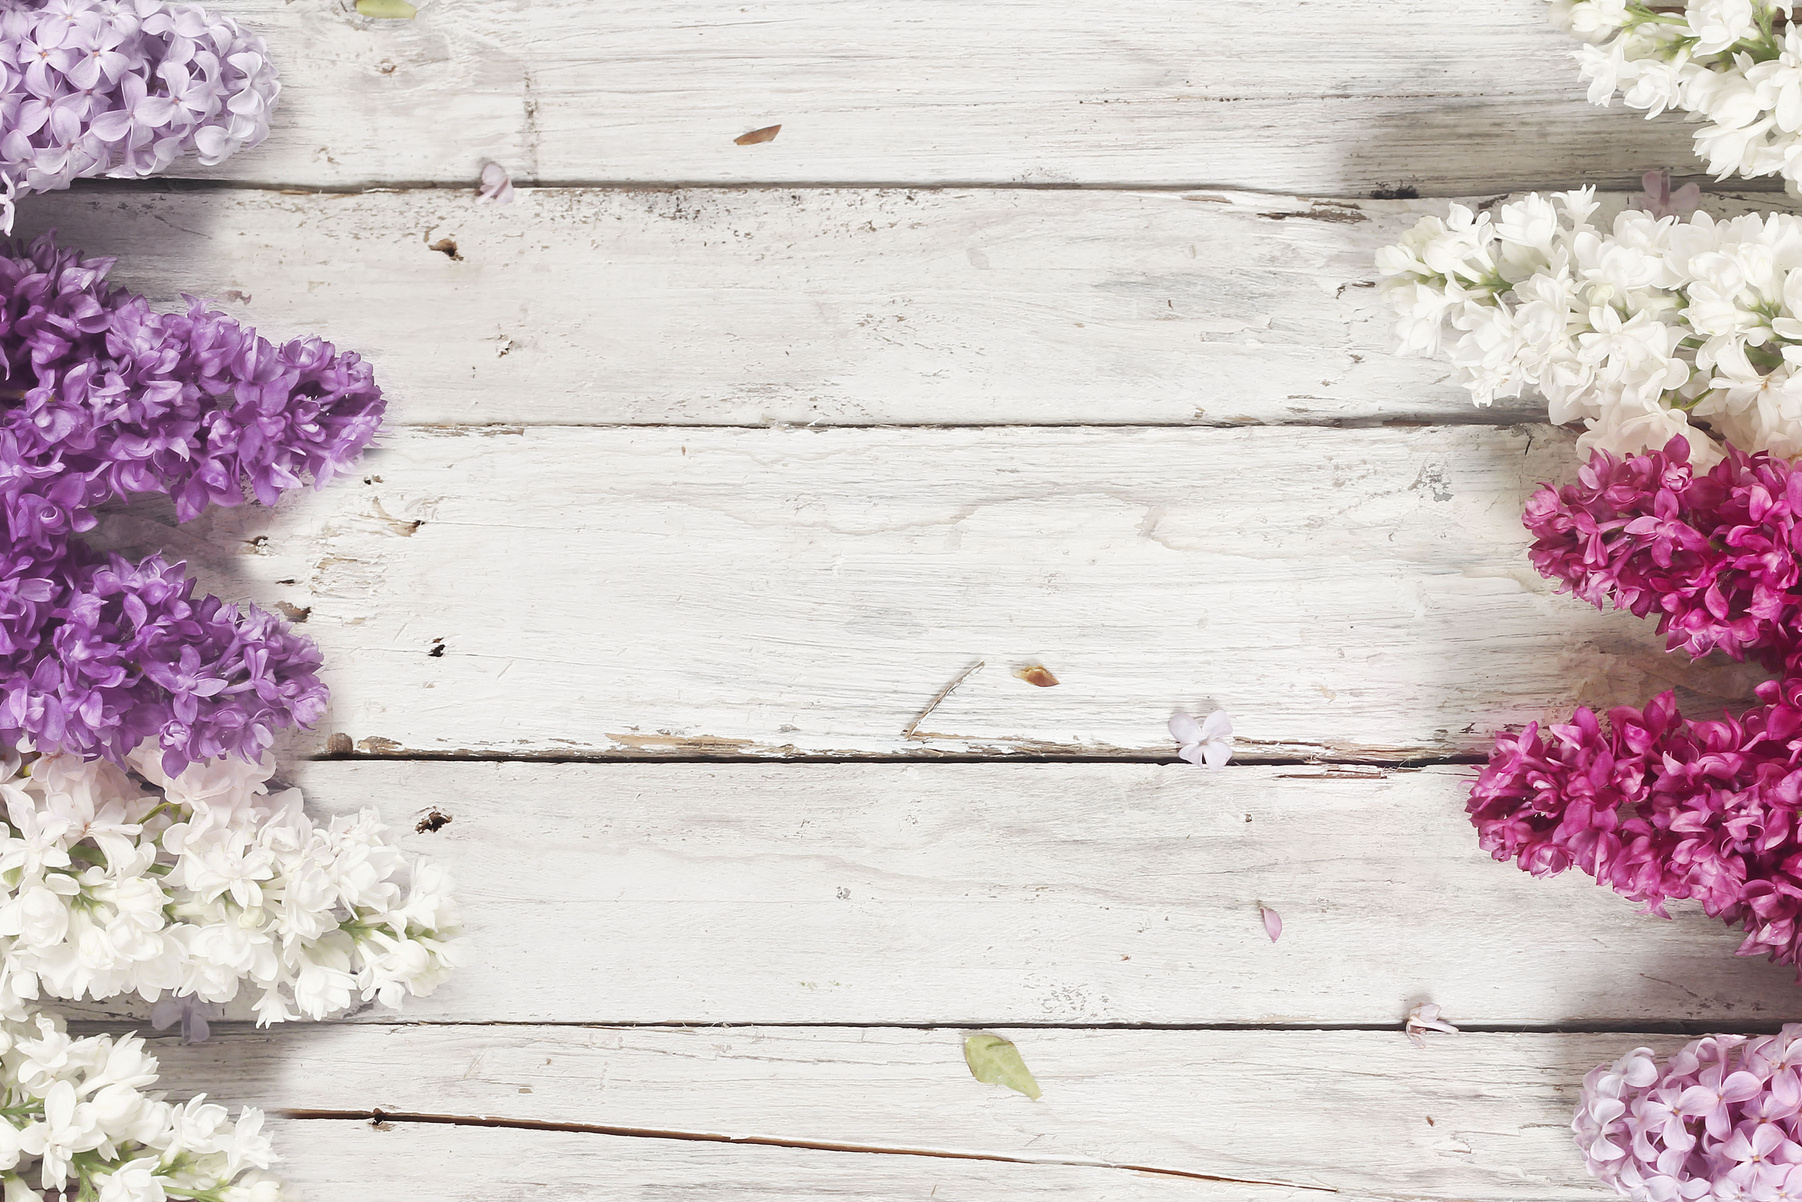 wood background with lilac flowers